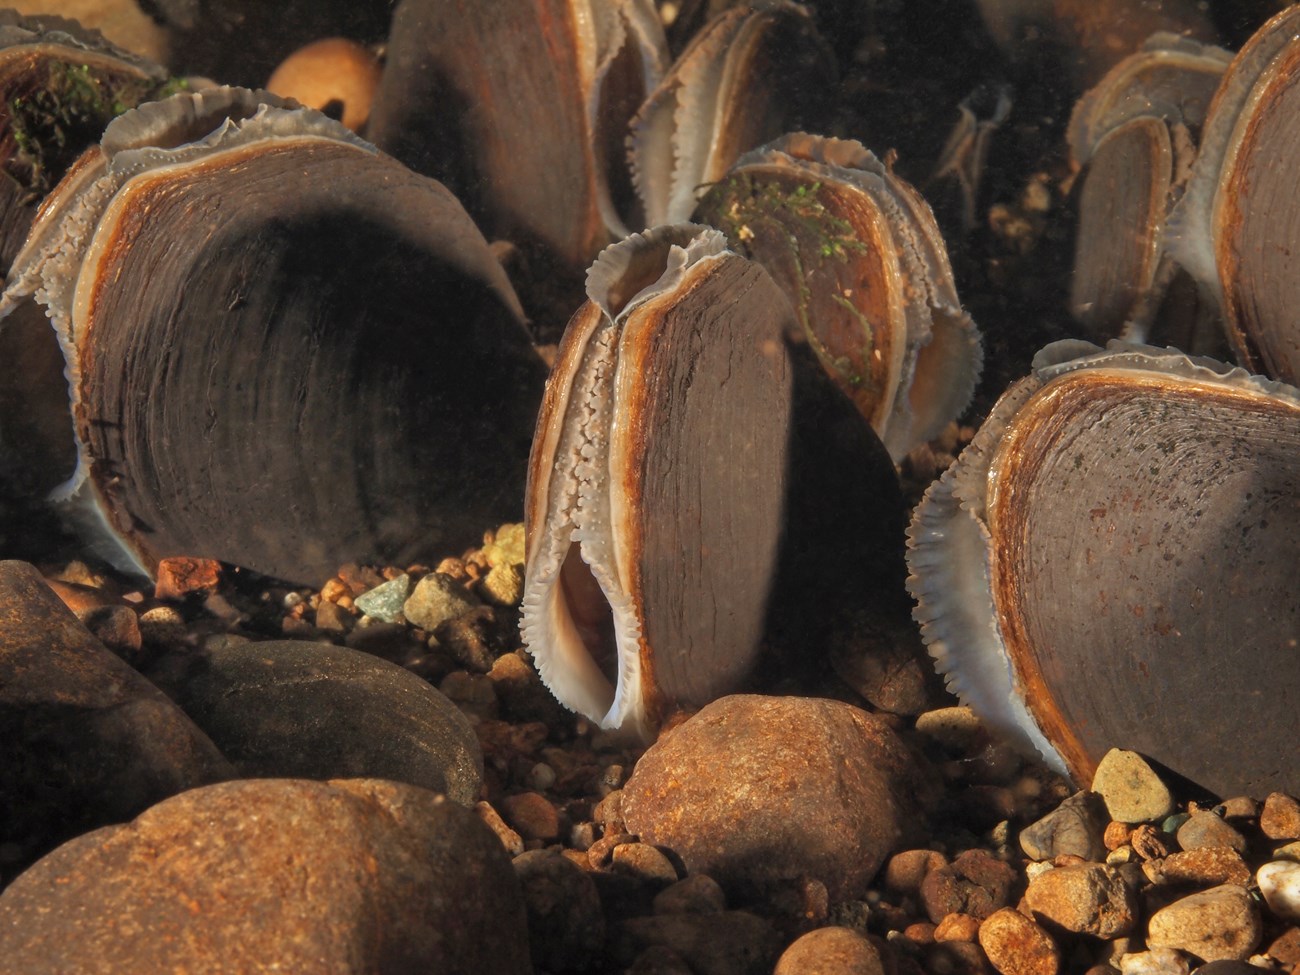 Oval-shapped mollusks resting on the streambed.